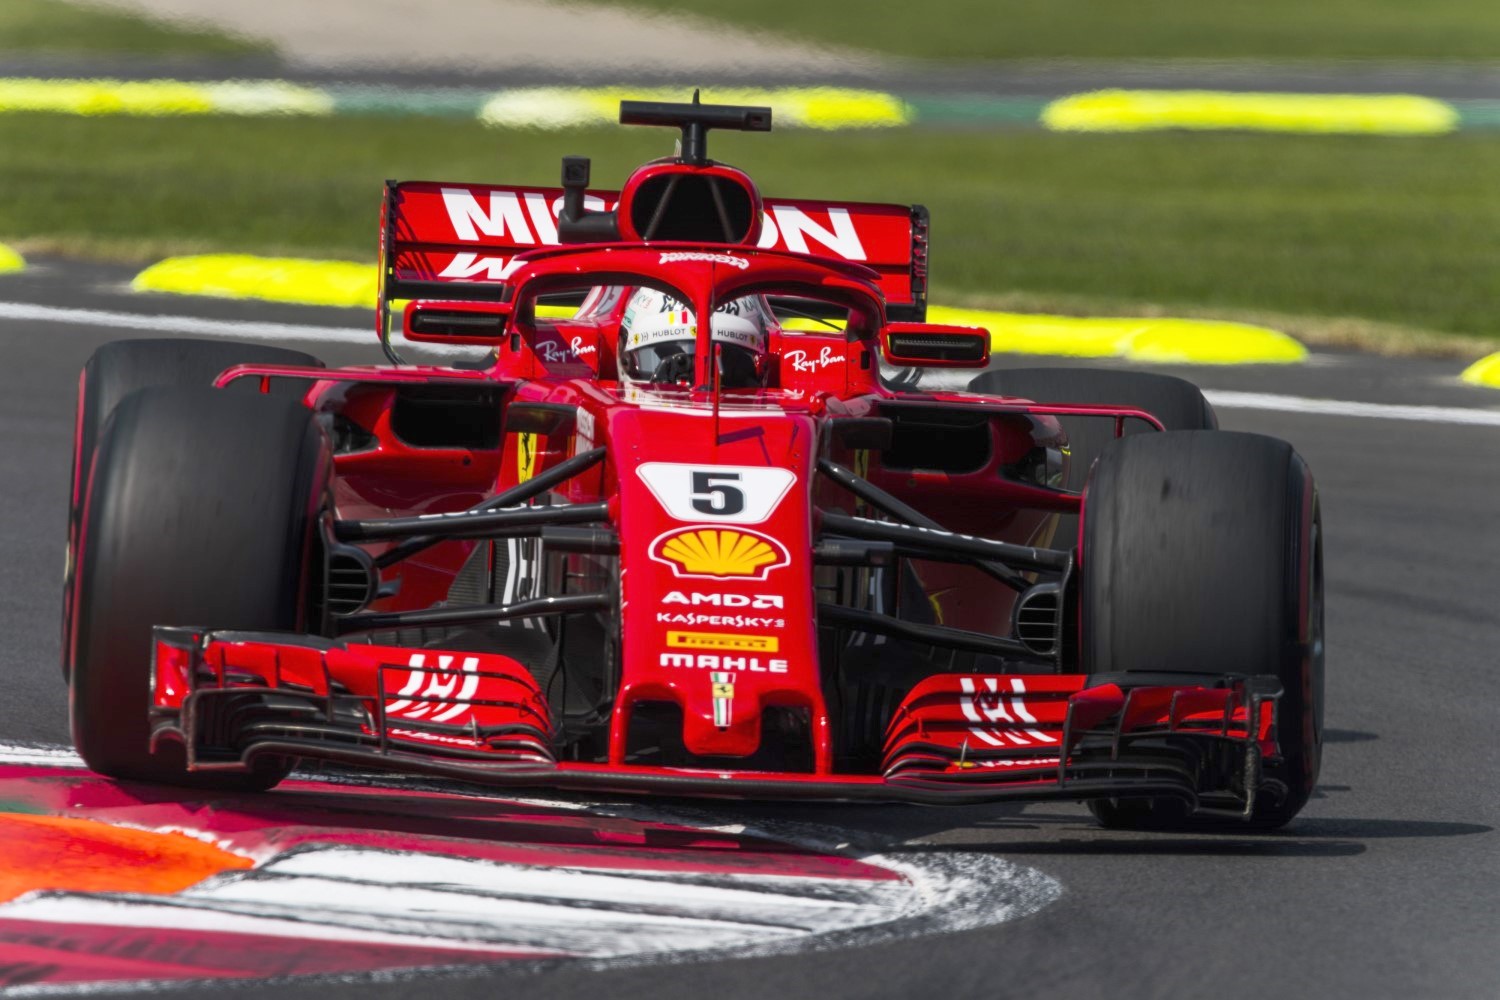 Vettel was fast, but he lost too much time behind other drivers to catch Verstappen